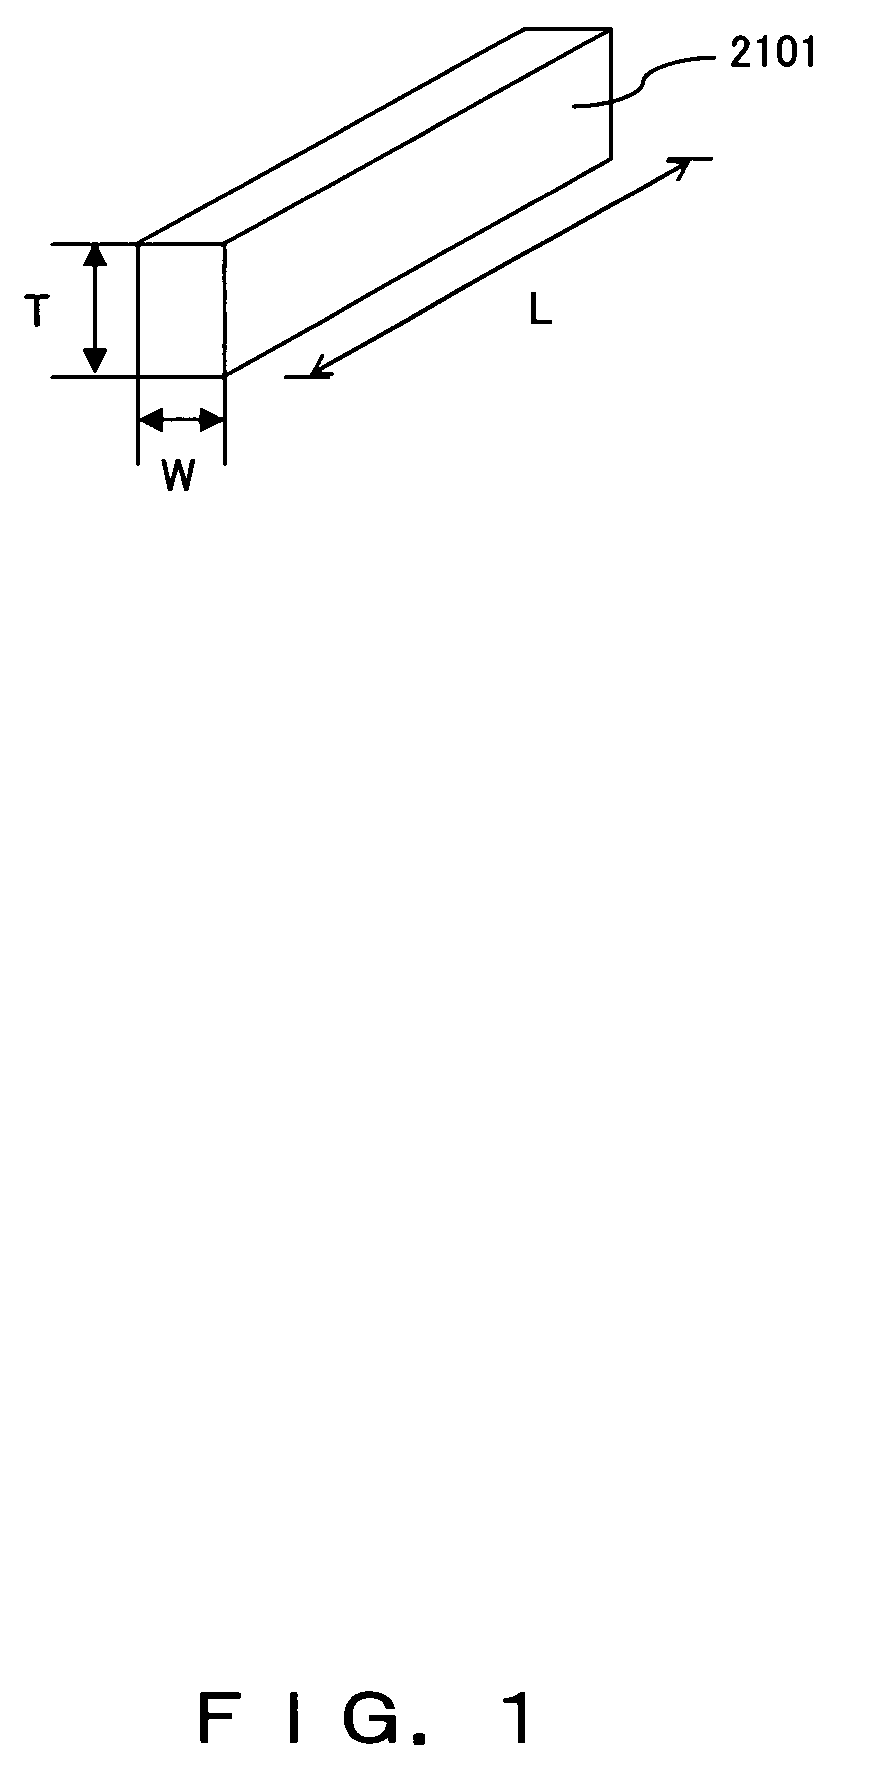 Array ultrasonic transducer having piezoelectric devices